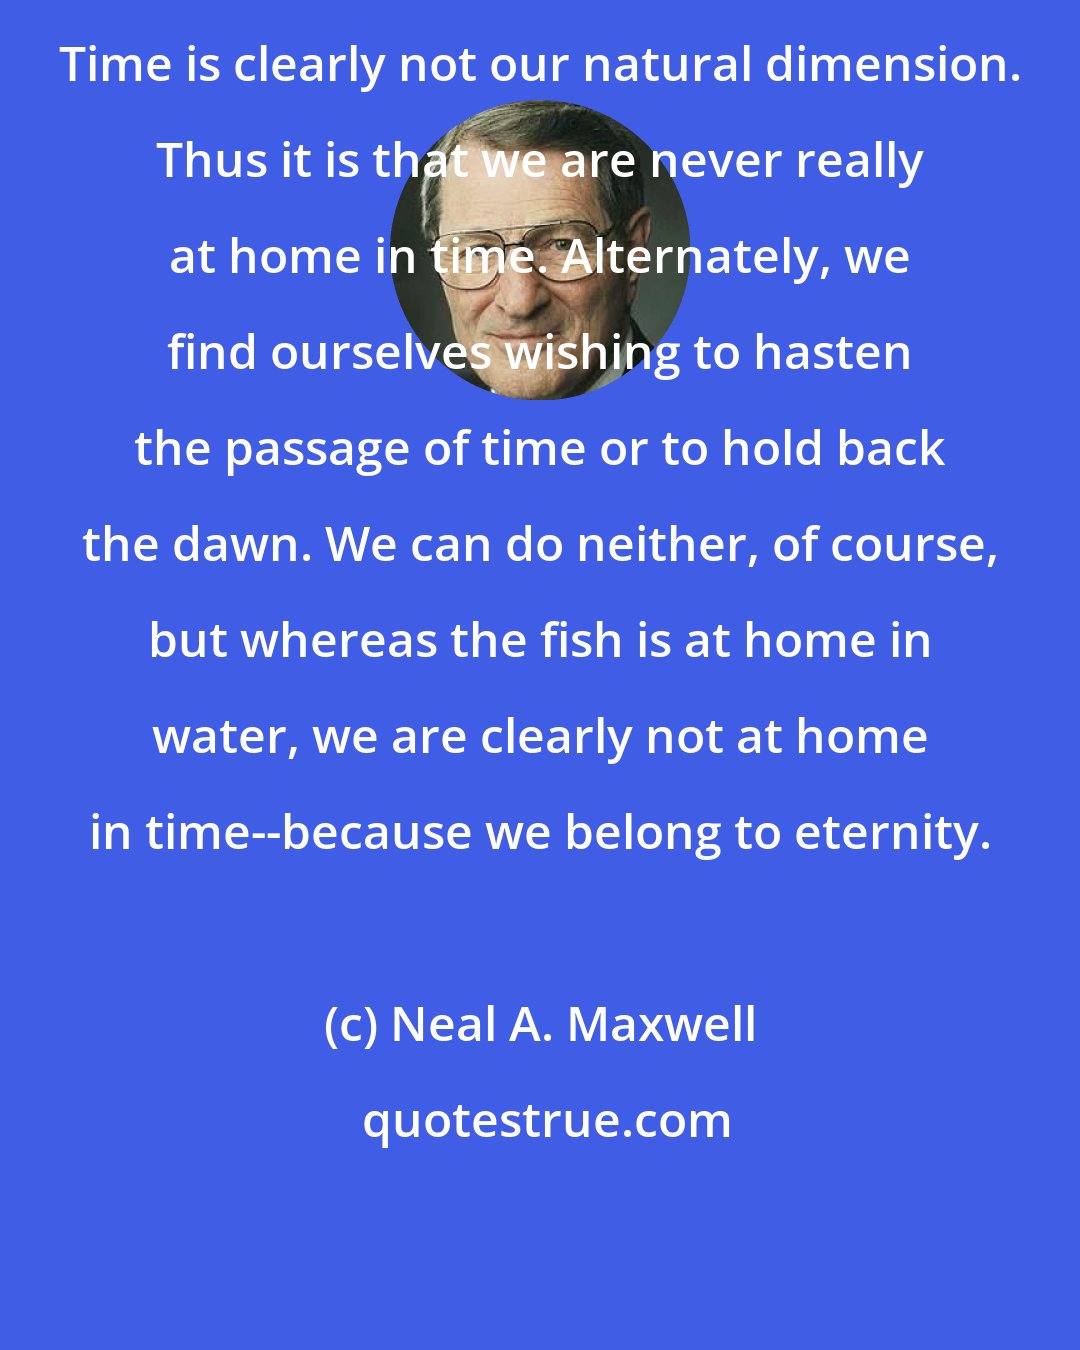 Neal A. Maxwell: Time is clearly not our natural dimension. Thus it is that we are never really at home in time. Alternately, we find ourselves wishing to hasten the passage of time or to hold back the dawn. We can do neither, of course, but whereas the fish is at home in water, we are clearly not at home in time--because we belong to eternity.